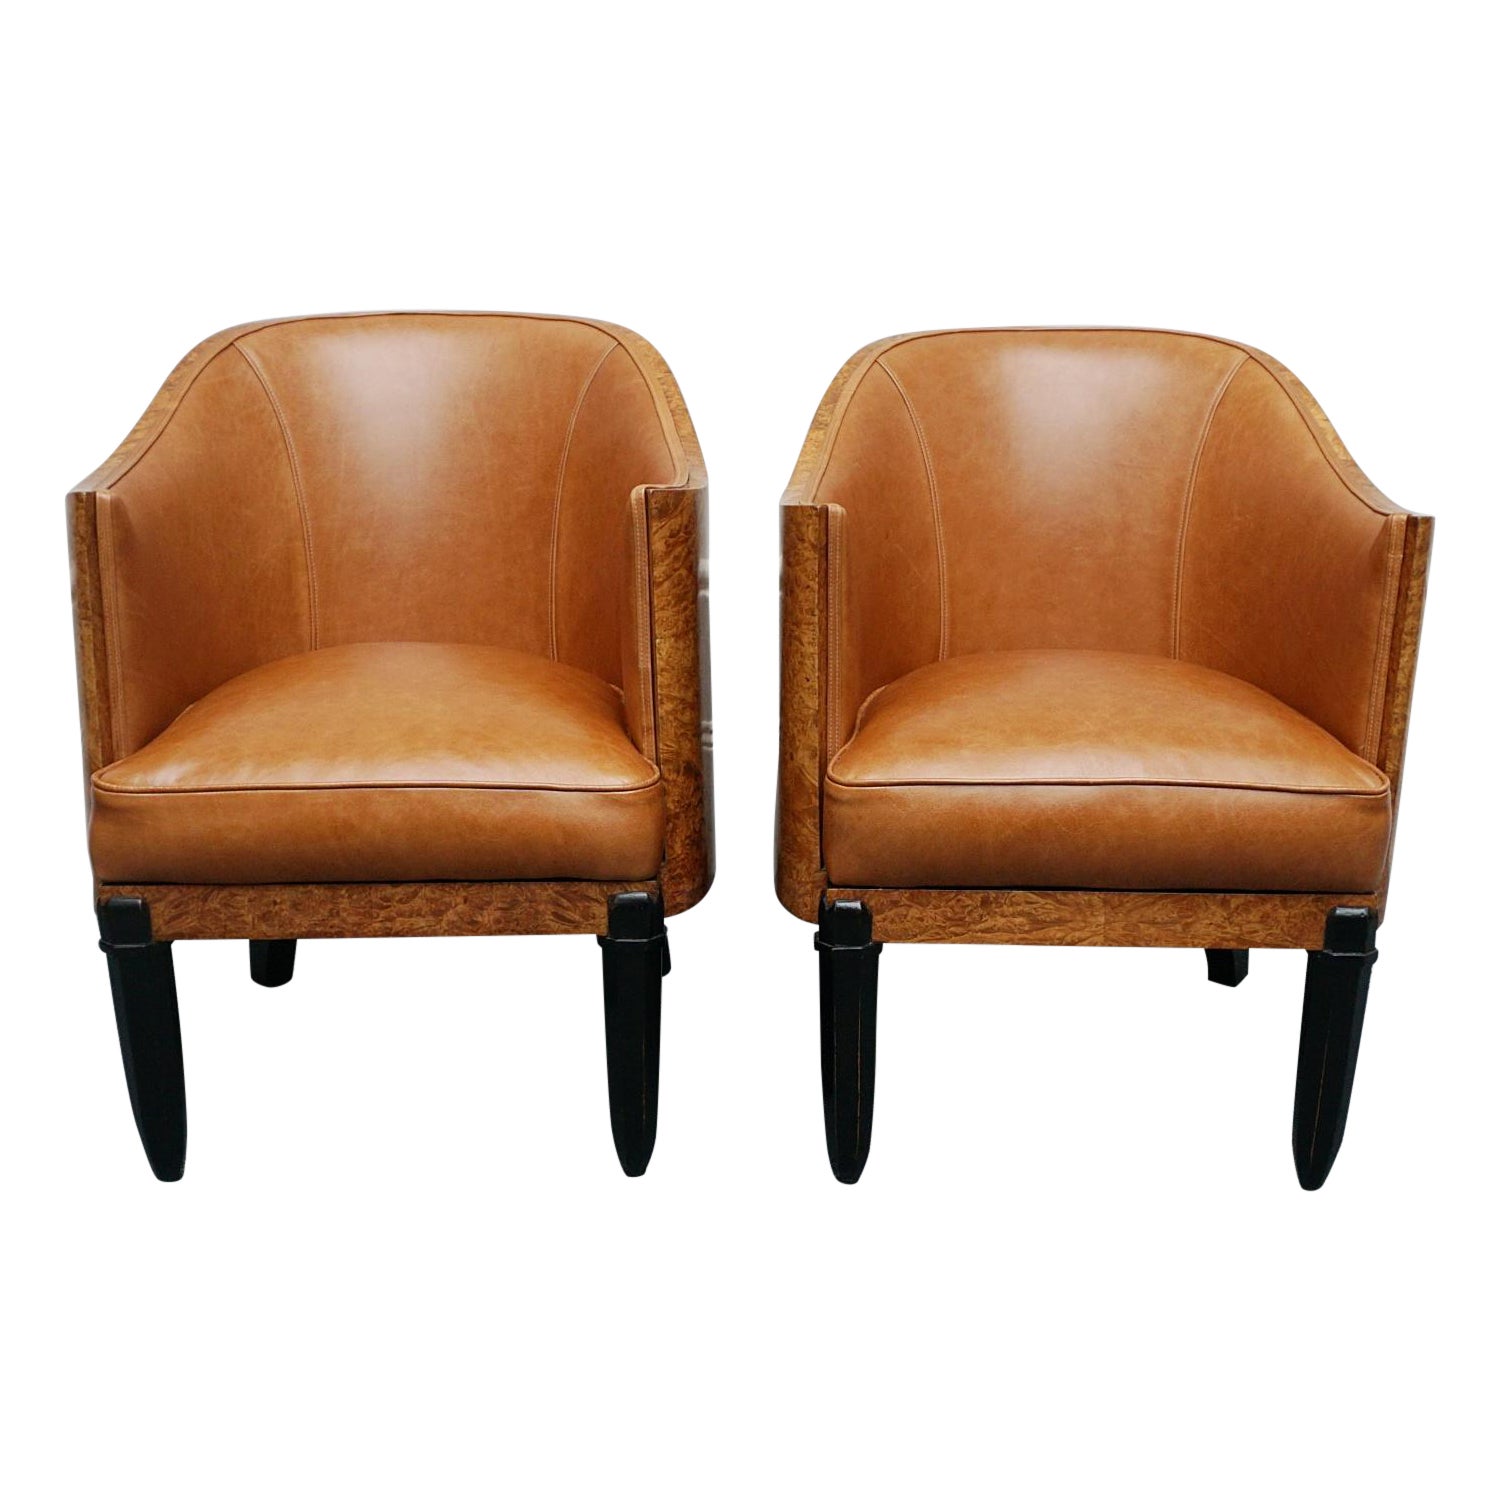 Original Pair of Walnut and Leather Art Deco Club Chairs 